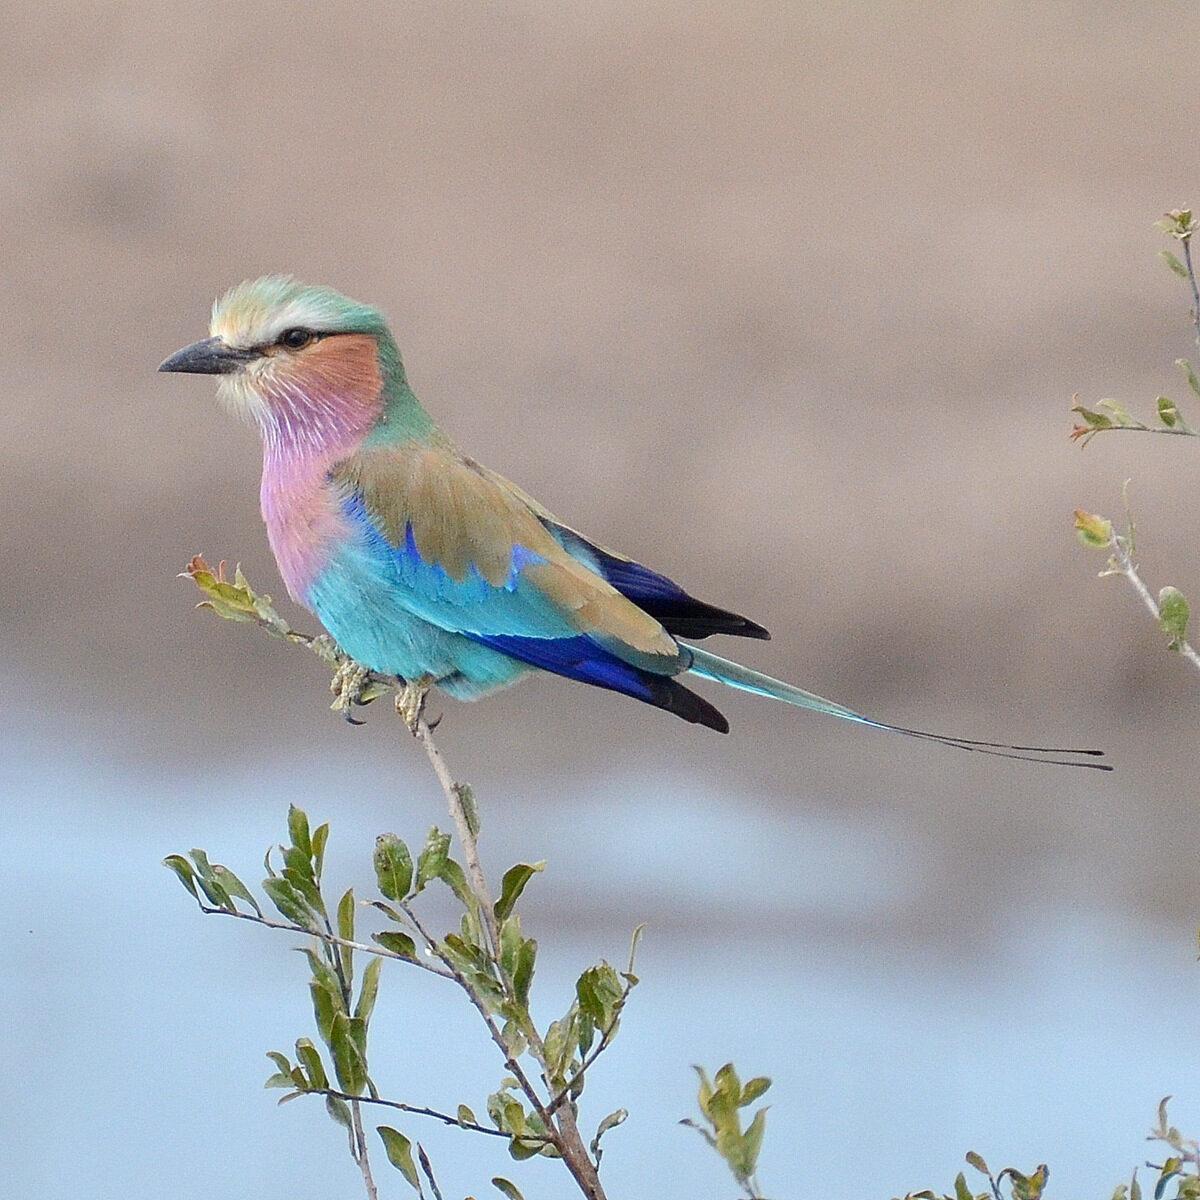 A lilac-breasted roller. (Courtesy of Kevin Revolinski)